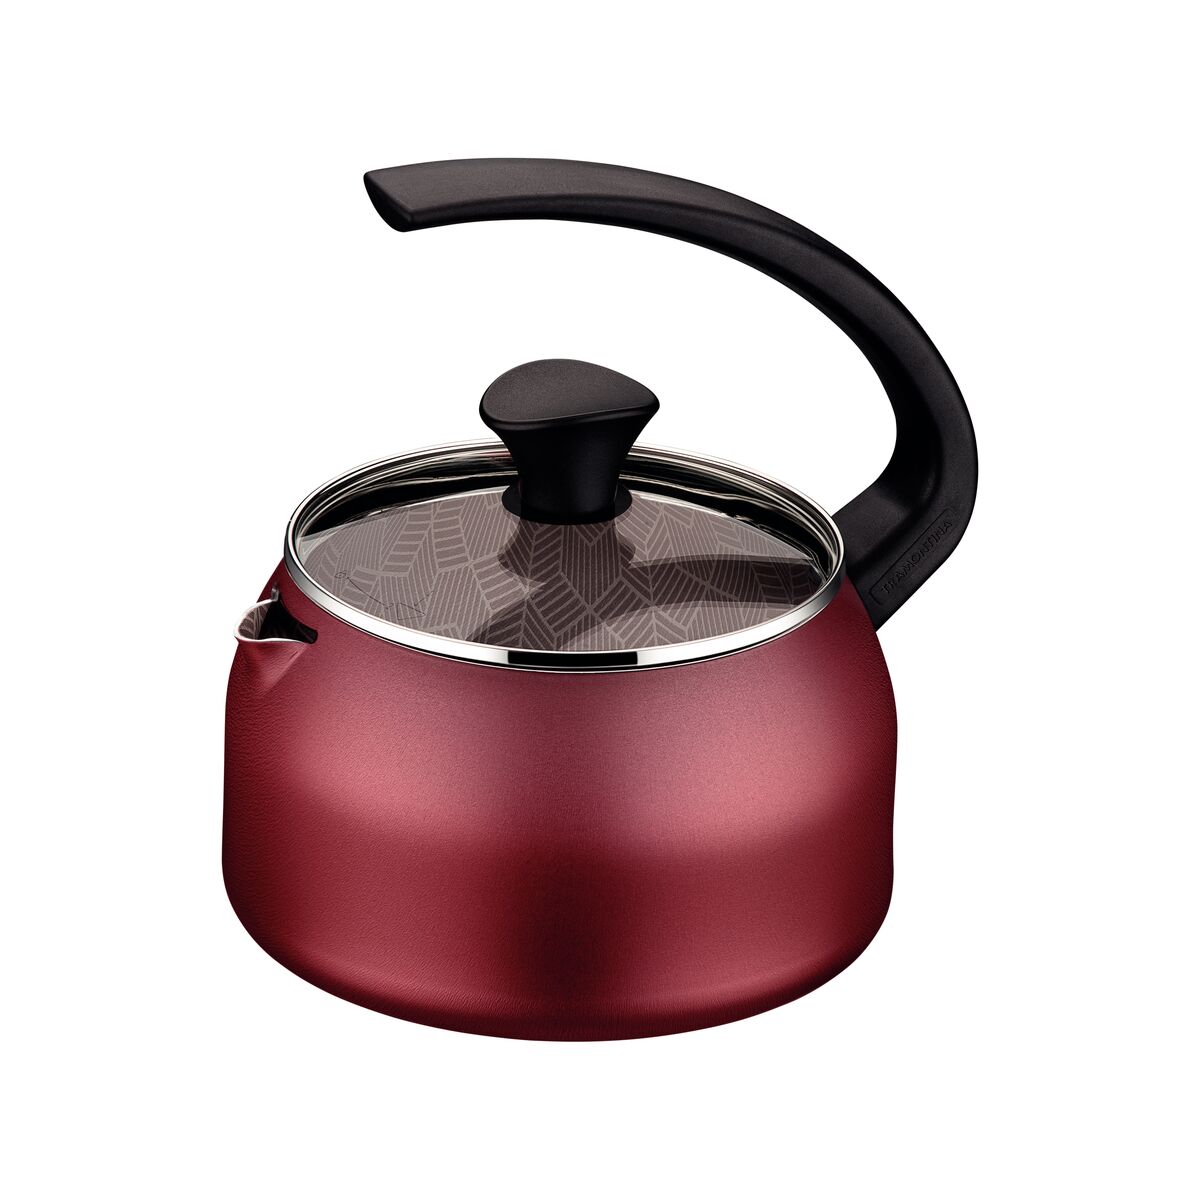 Tramontina 1,9 L Red Aluminum Kettle with Interior and Exterior Starflon Max nonstick coating